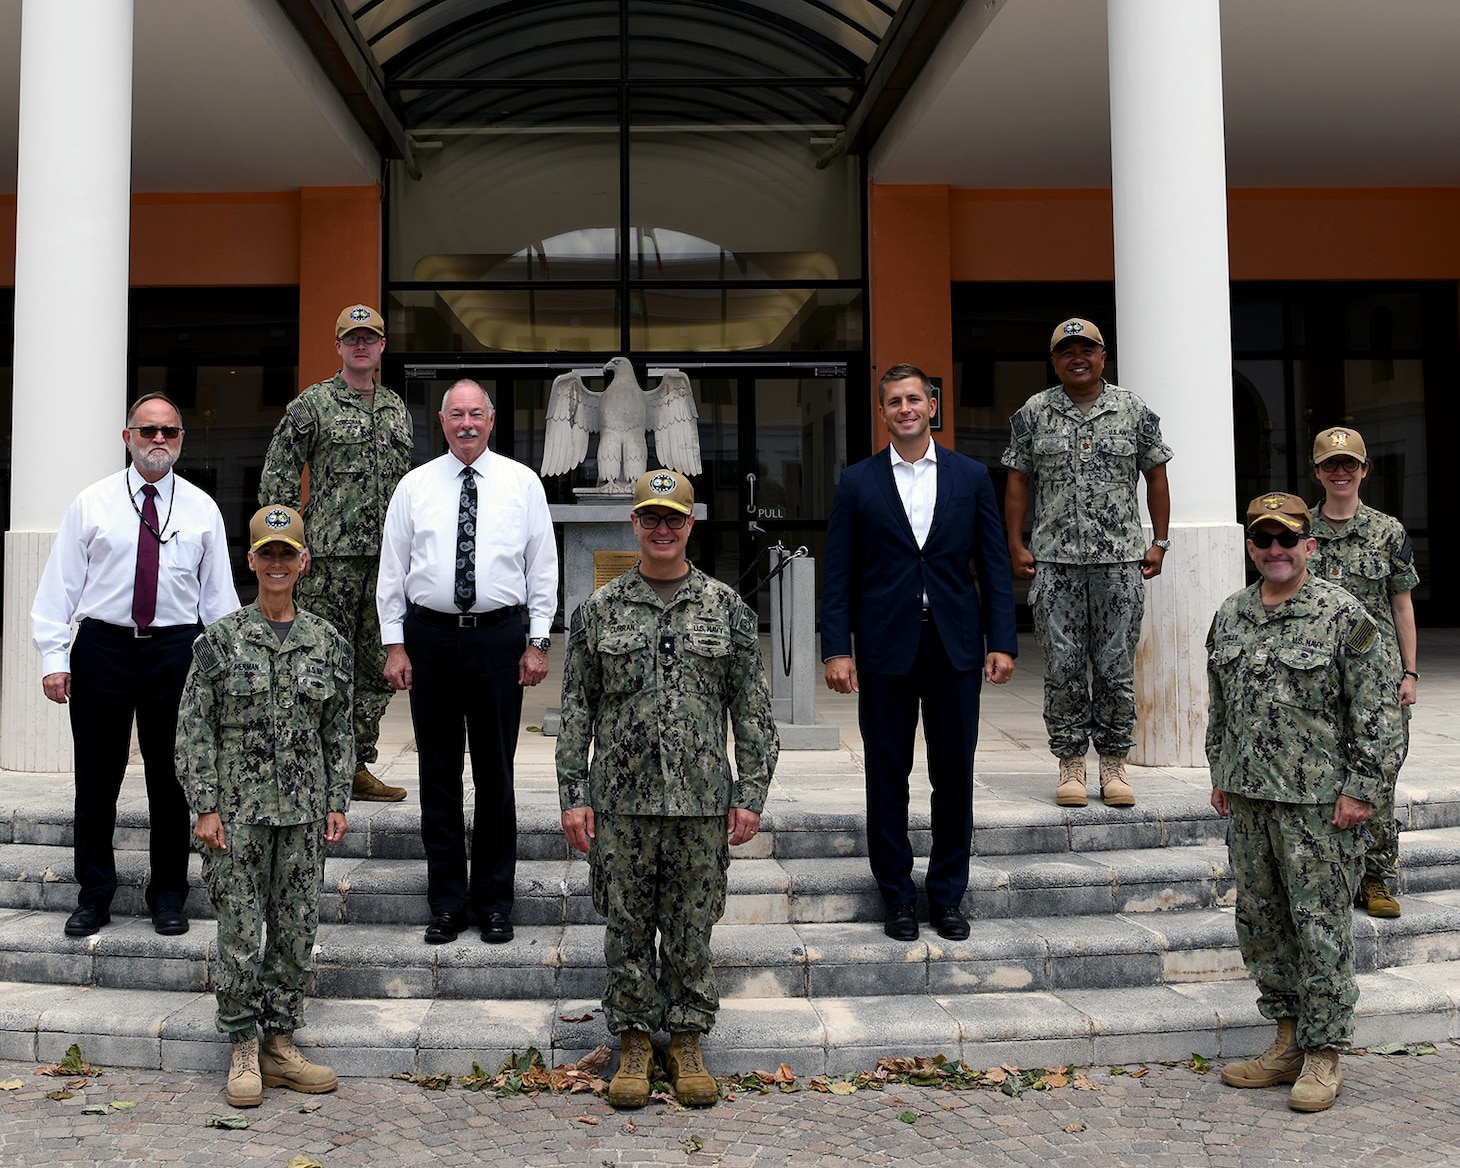 (July 15, 2021) Rear Adm. Michael Curran, Director, Readiness and Logistics, U.S. Naval Forces Europe-Africa, center, poses for a group photo with members of the Host Nation operational planning team assigned to Commander, Naval Forces Europe and Africa (NAVEUR-NAVAF), July 15, 2021, in Naples, Italy. NAVEUR-NAVAF, headquartered in Naples, Italy, conduct the full spectrum of joint and naval operations, often in concert with allied and interagency partners in order to advance U.S. national interests and security and stability in Europe and Africa.